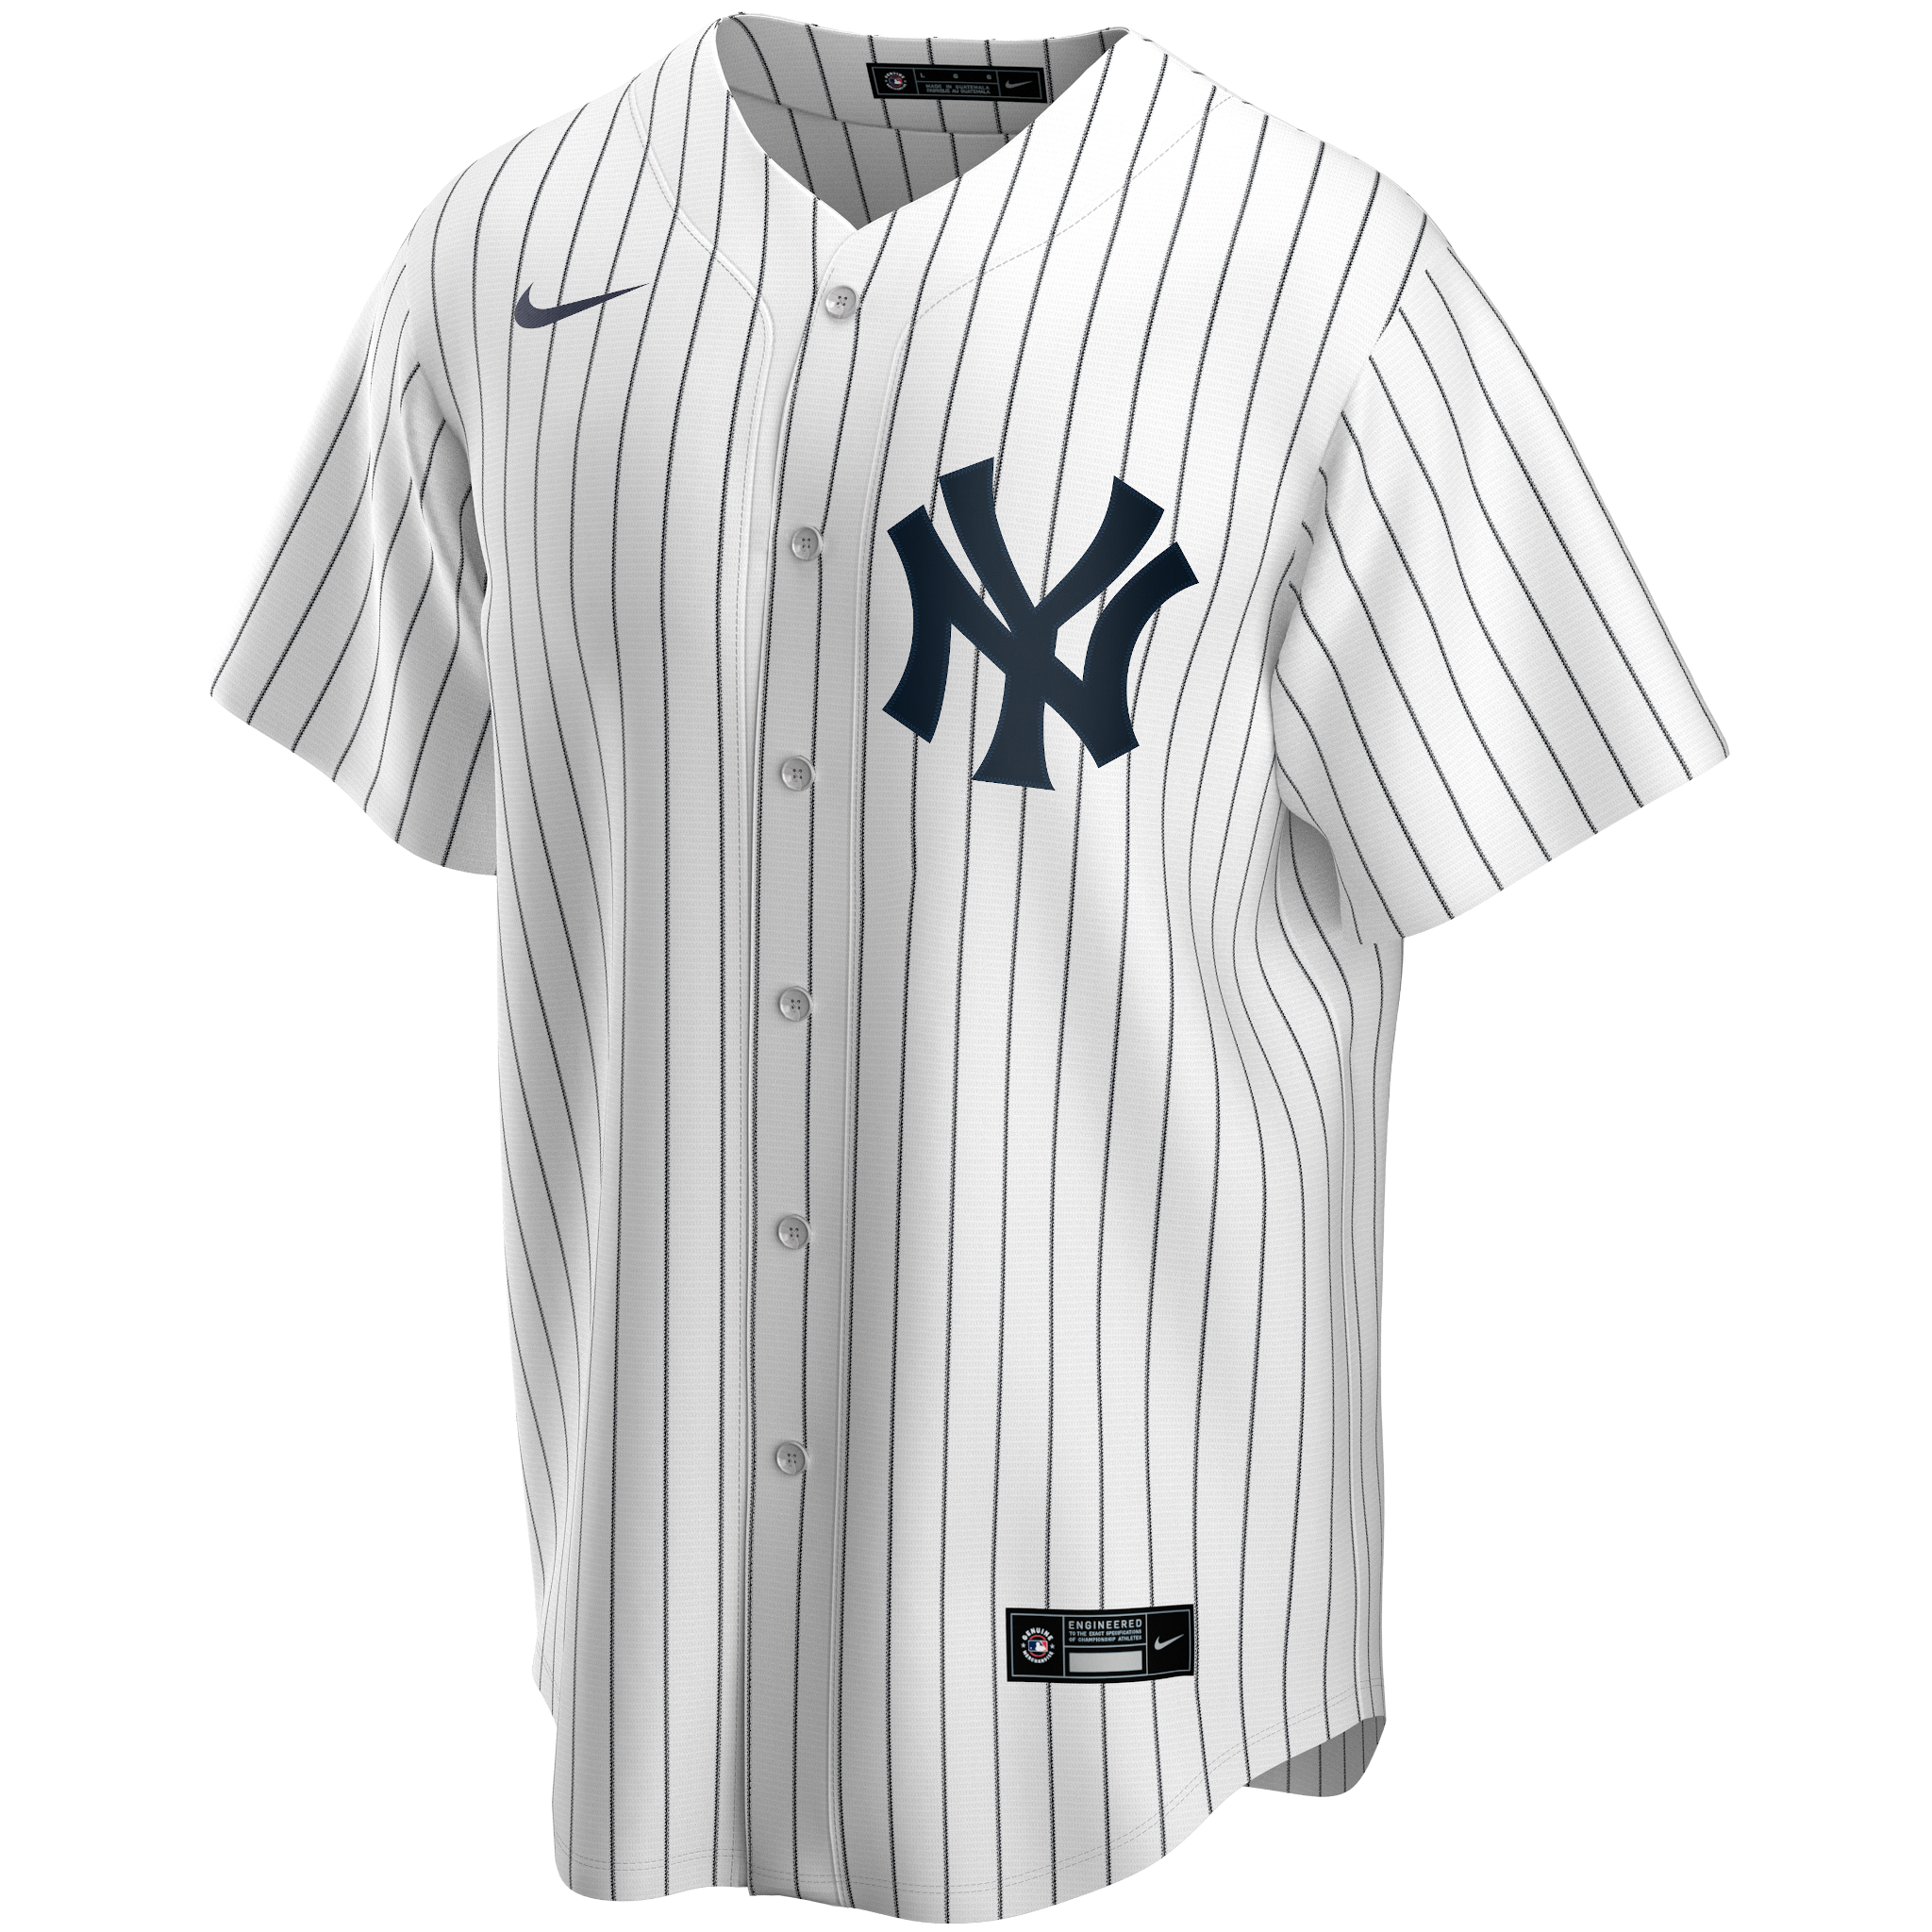 Tino Martinez New York Yankees Autographed White Majestic Authentic Jersey  – Signature on Front